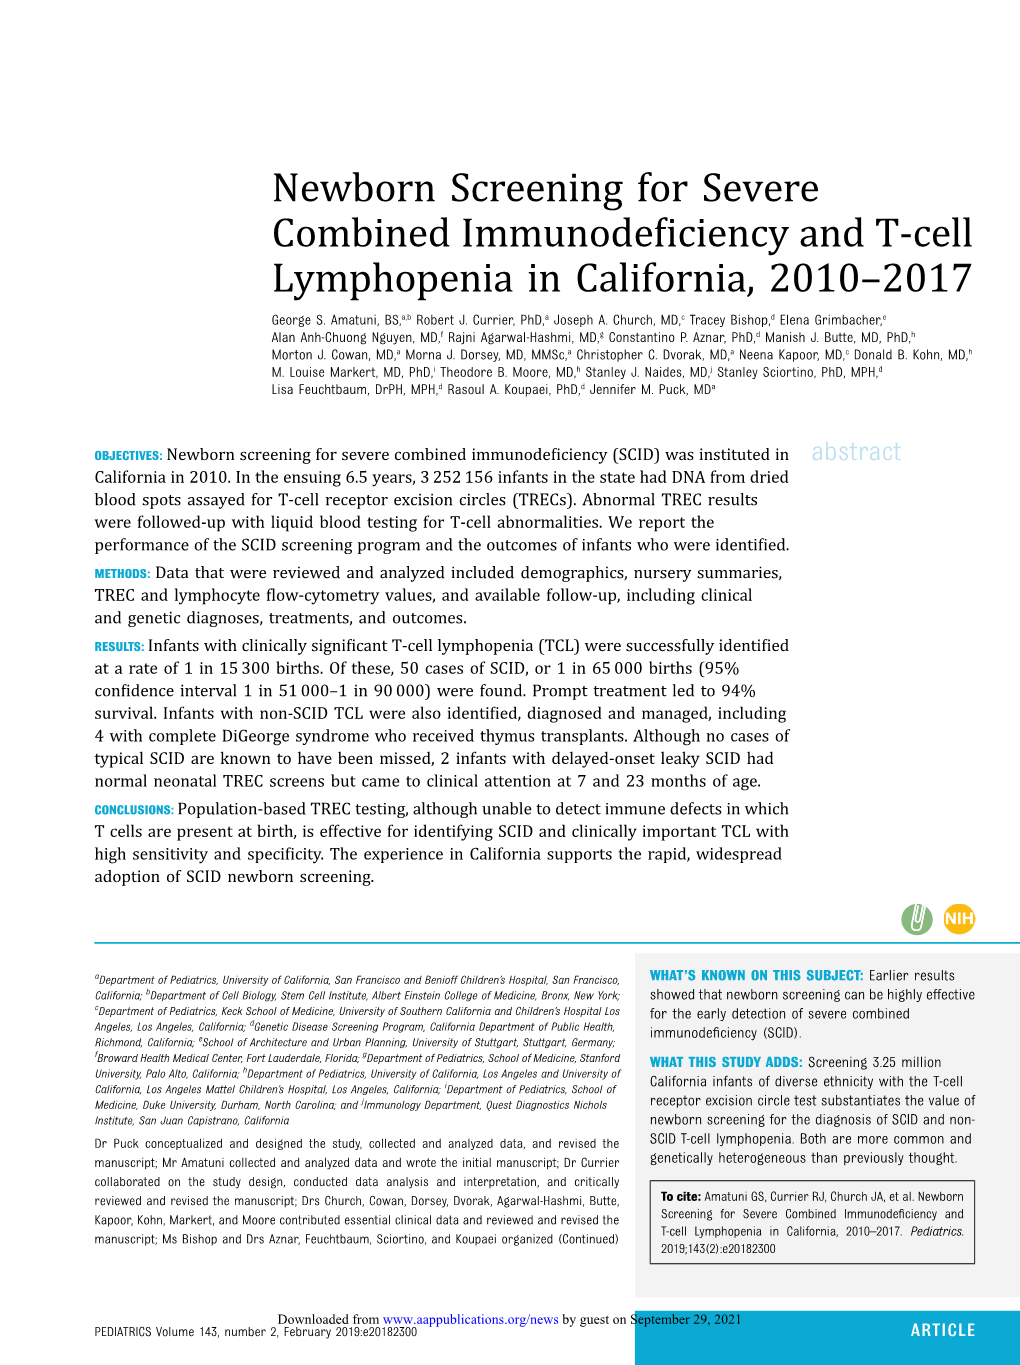 Newborn Screening for Severe Combined Immunodeficiency and T-Cell Lymphopenia in California, 2010−2017 George S